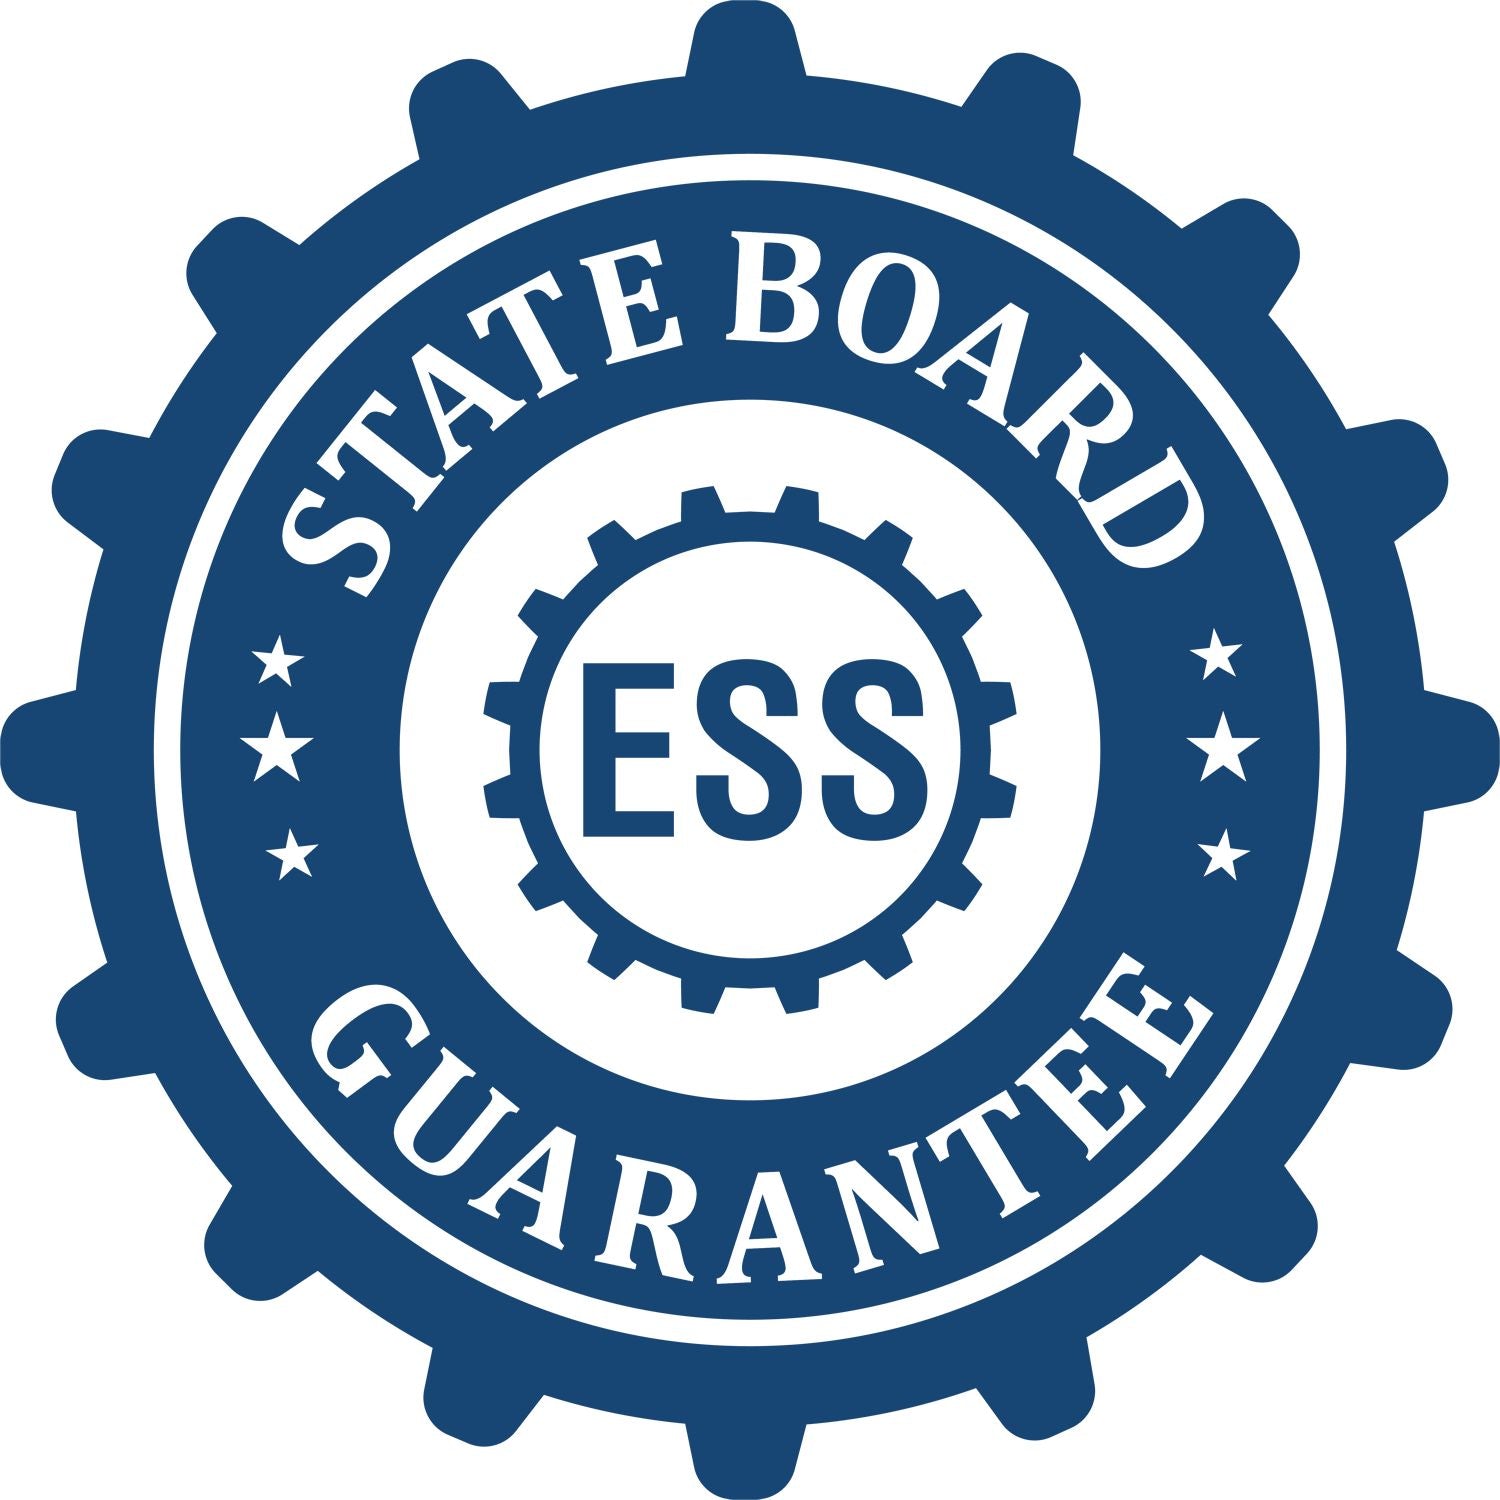 An emblem in a gear shape illustrating a state board guarantee for the Wisconsin Engineer Desk Seal product.